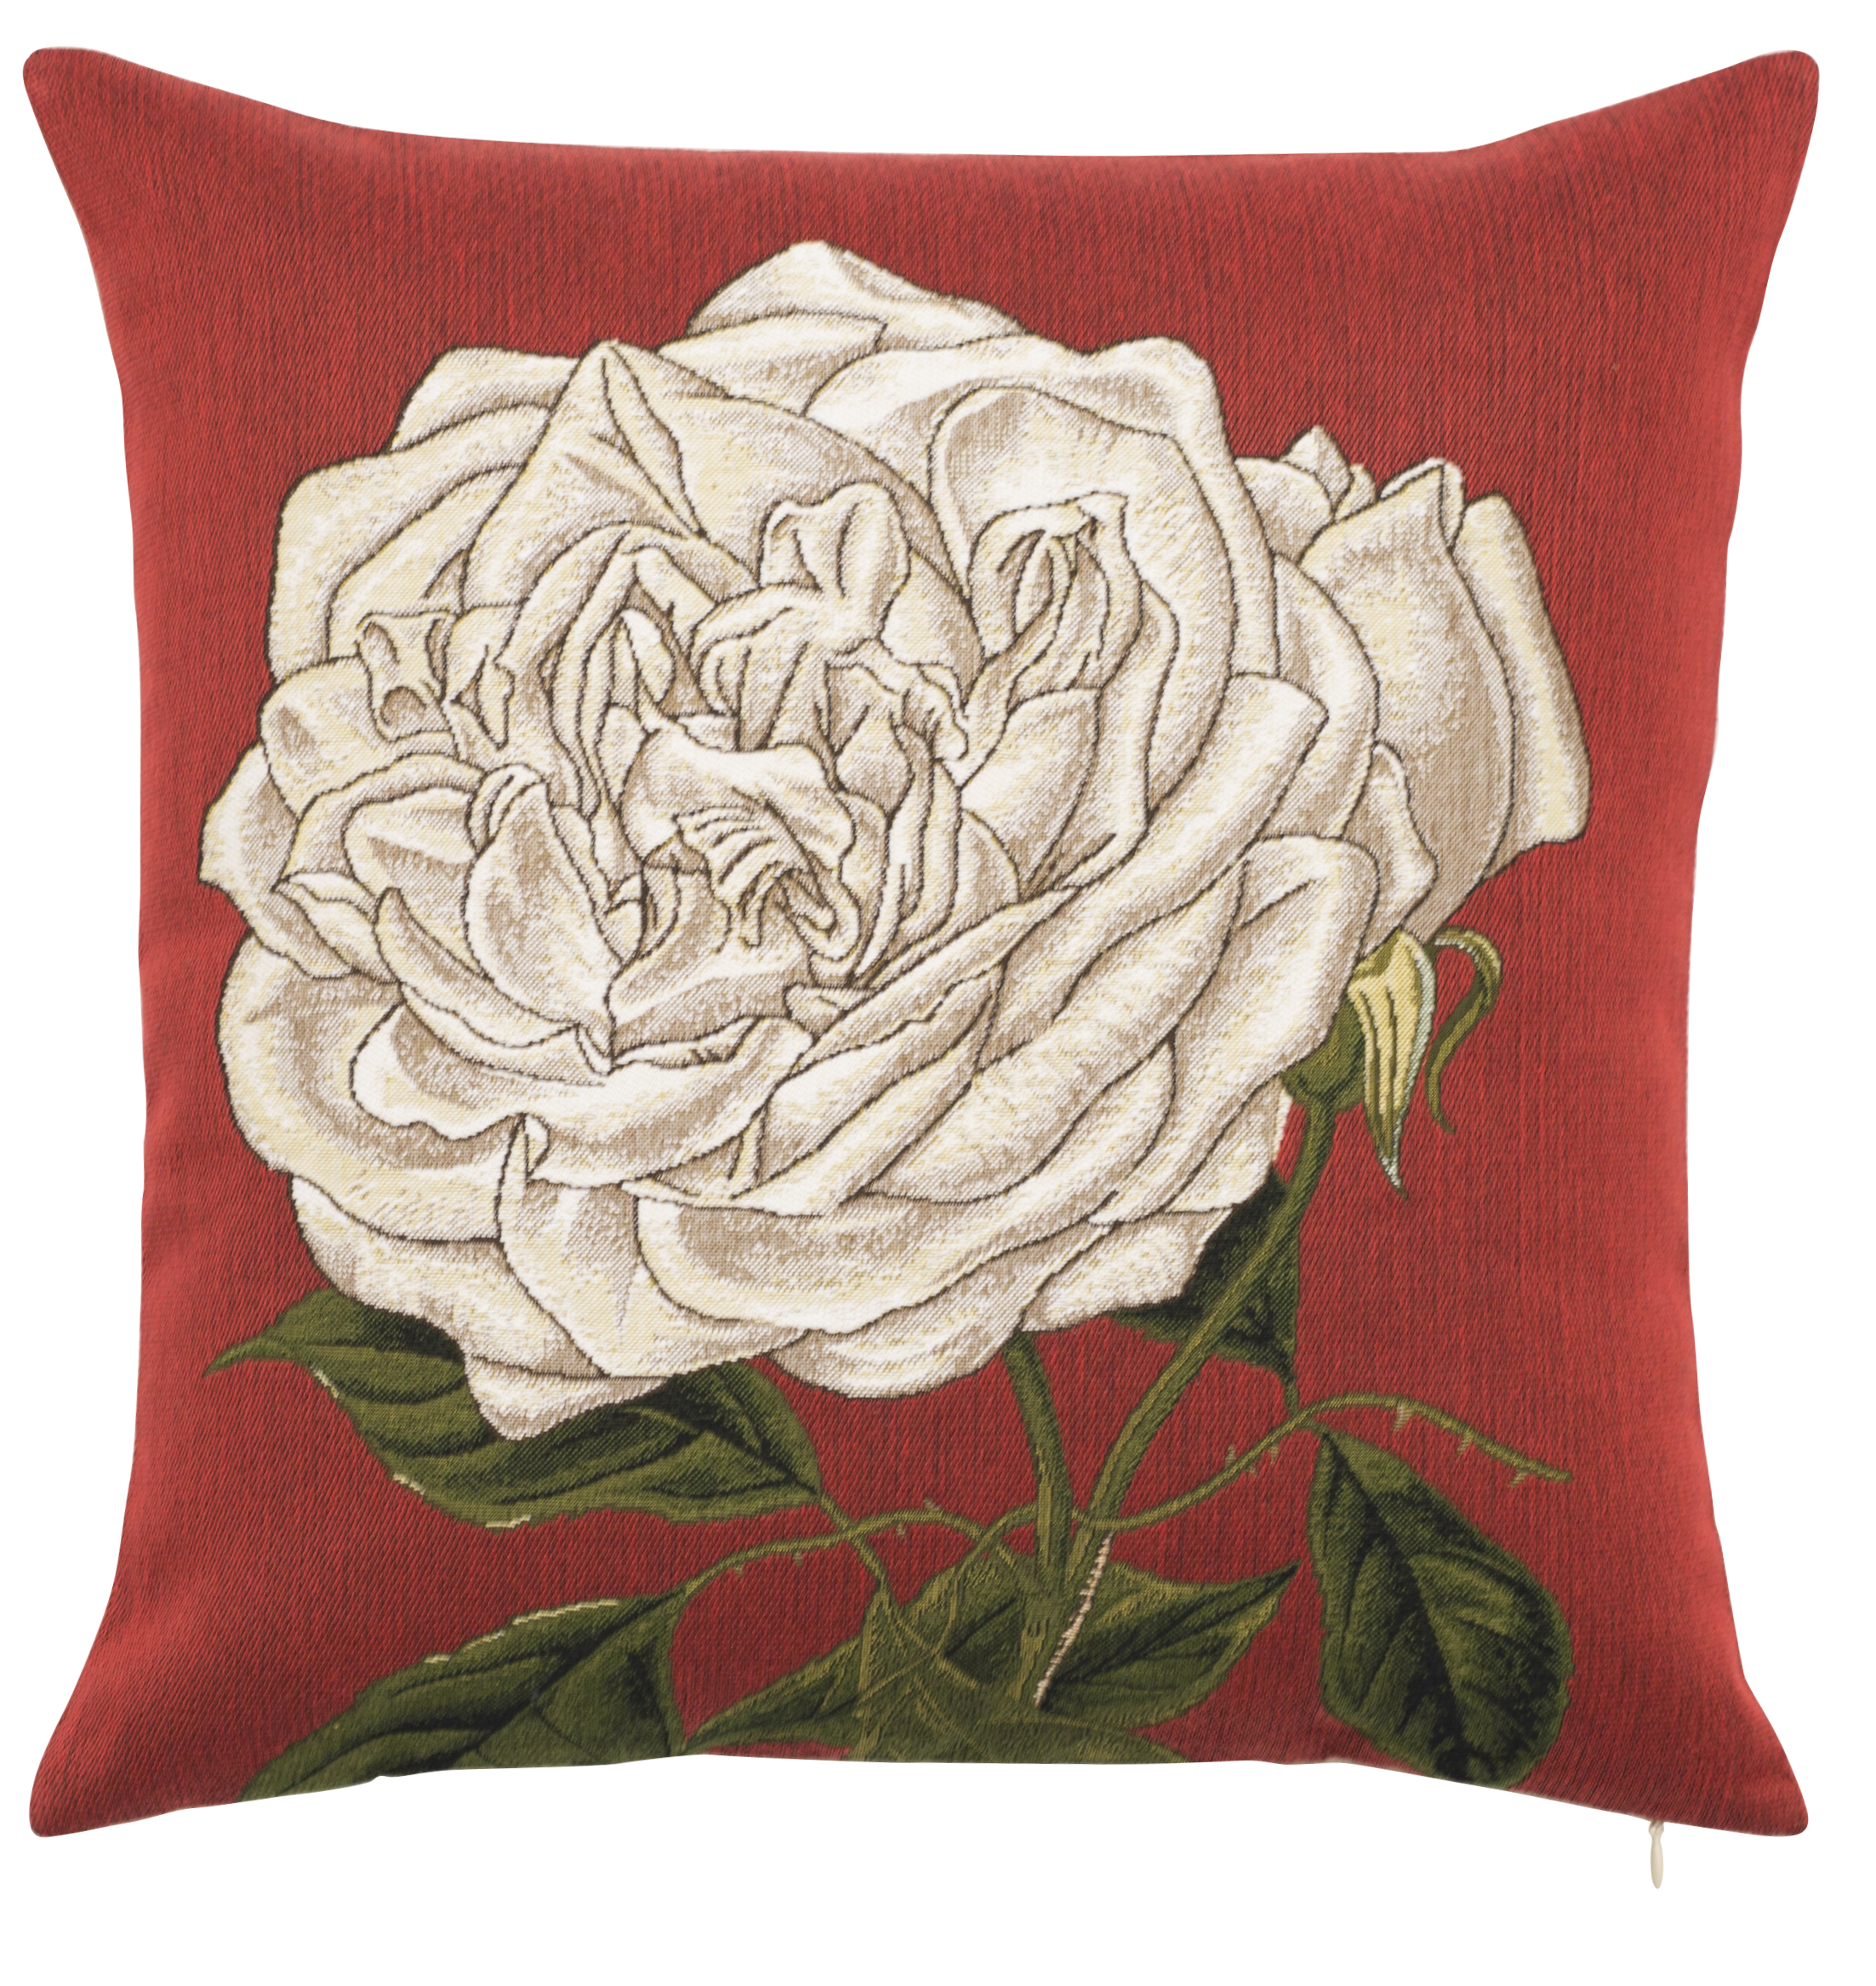 Pillow - Elisabeth - White in Red Background